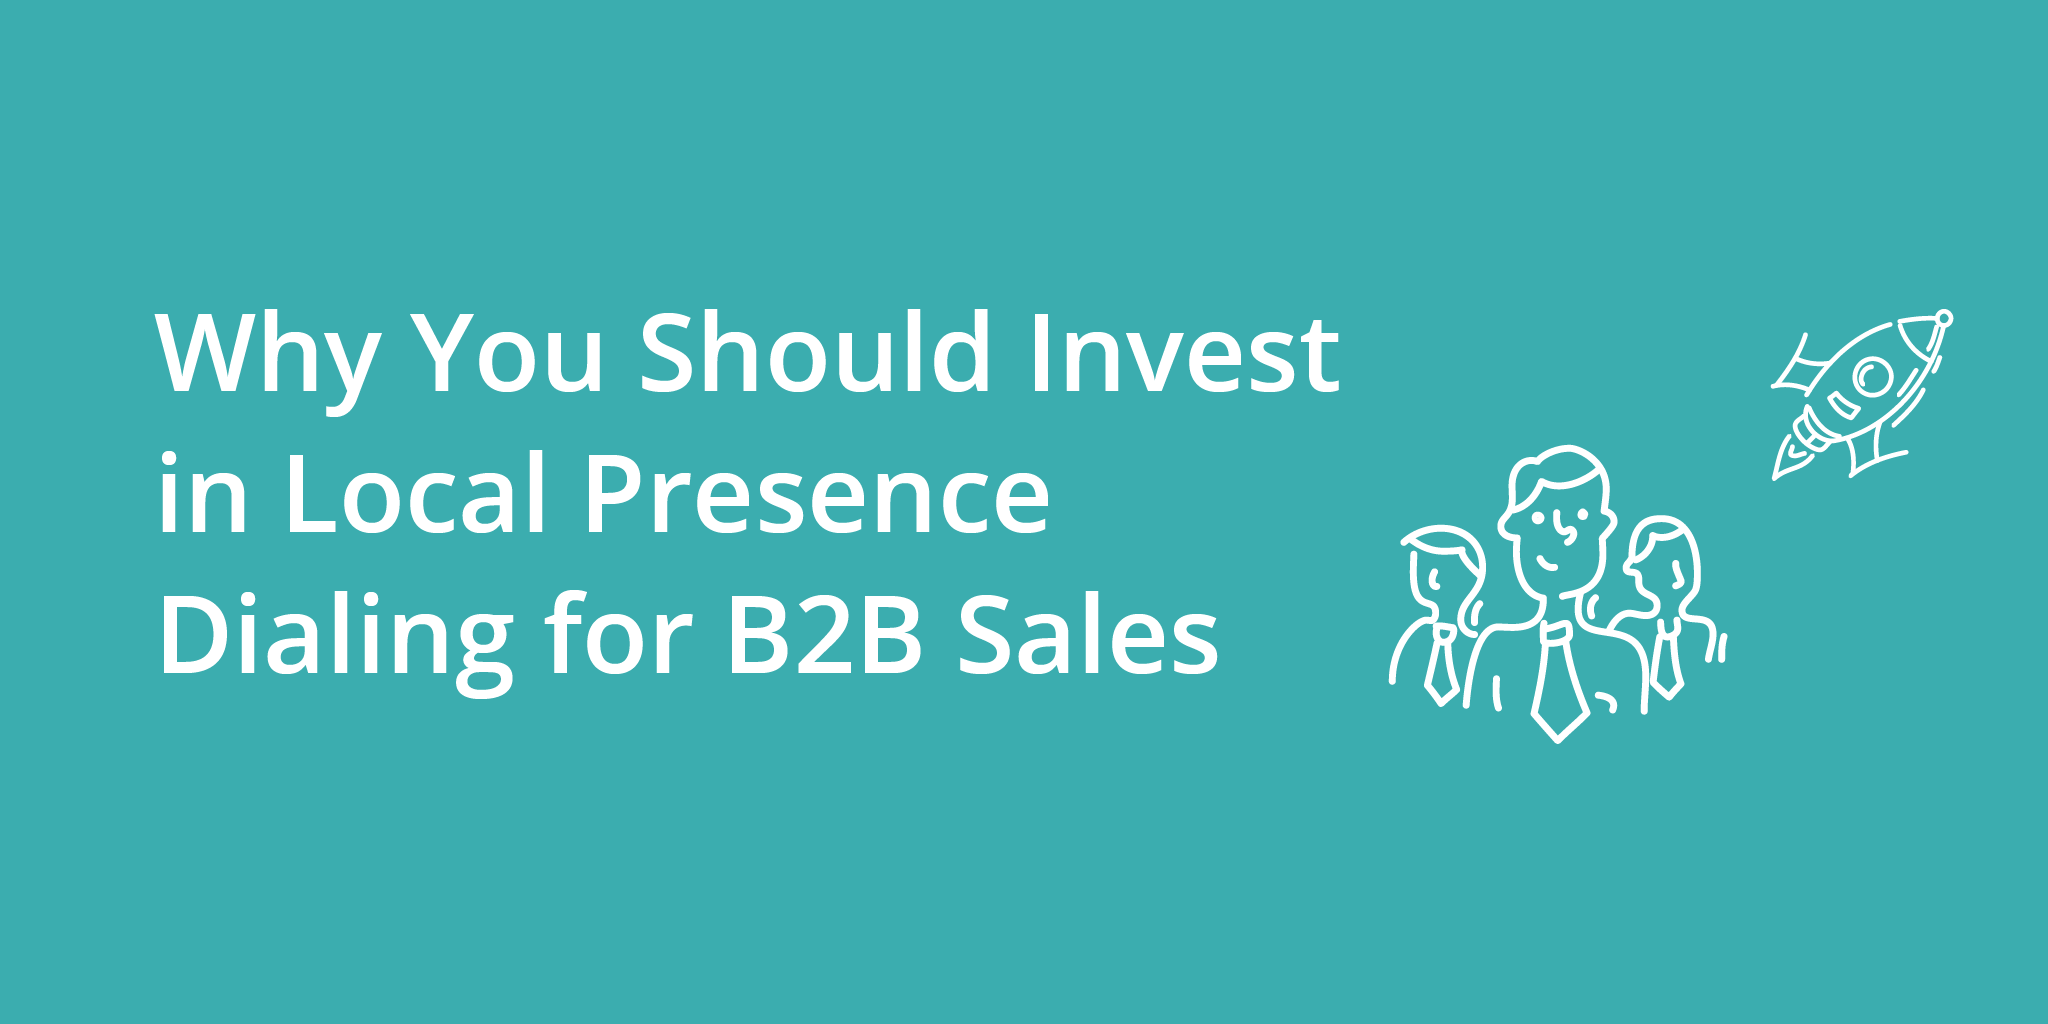 Why You Should Invest in Local Presence Dialing for B2B Sales | Telephones for business